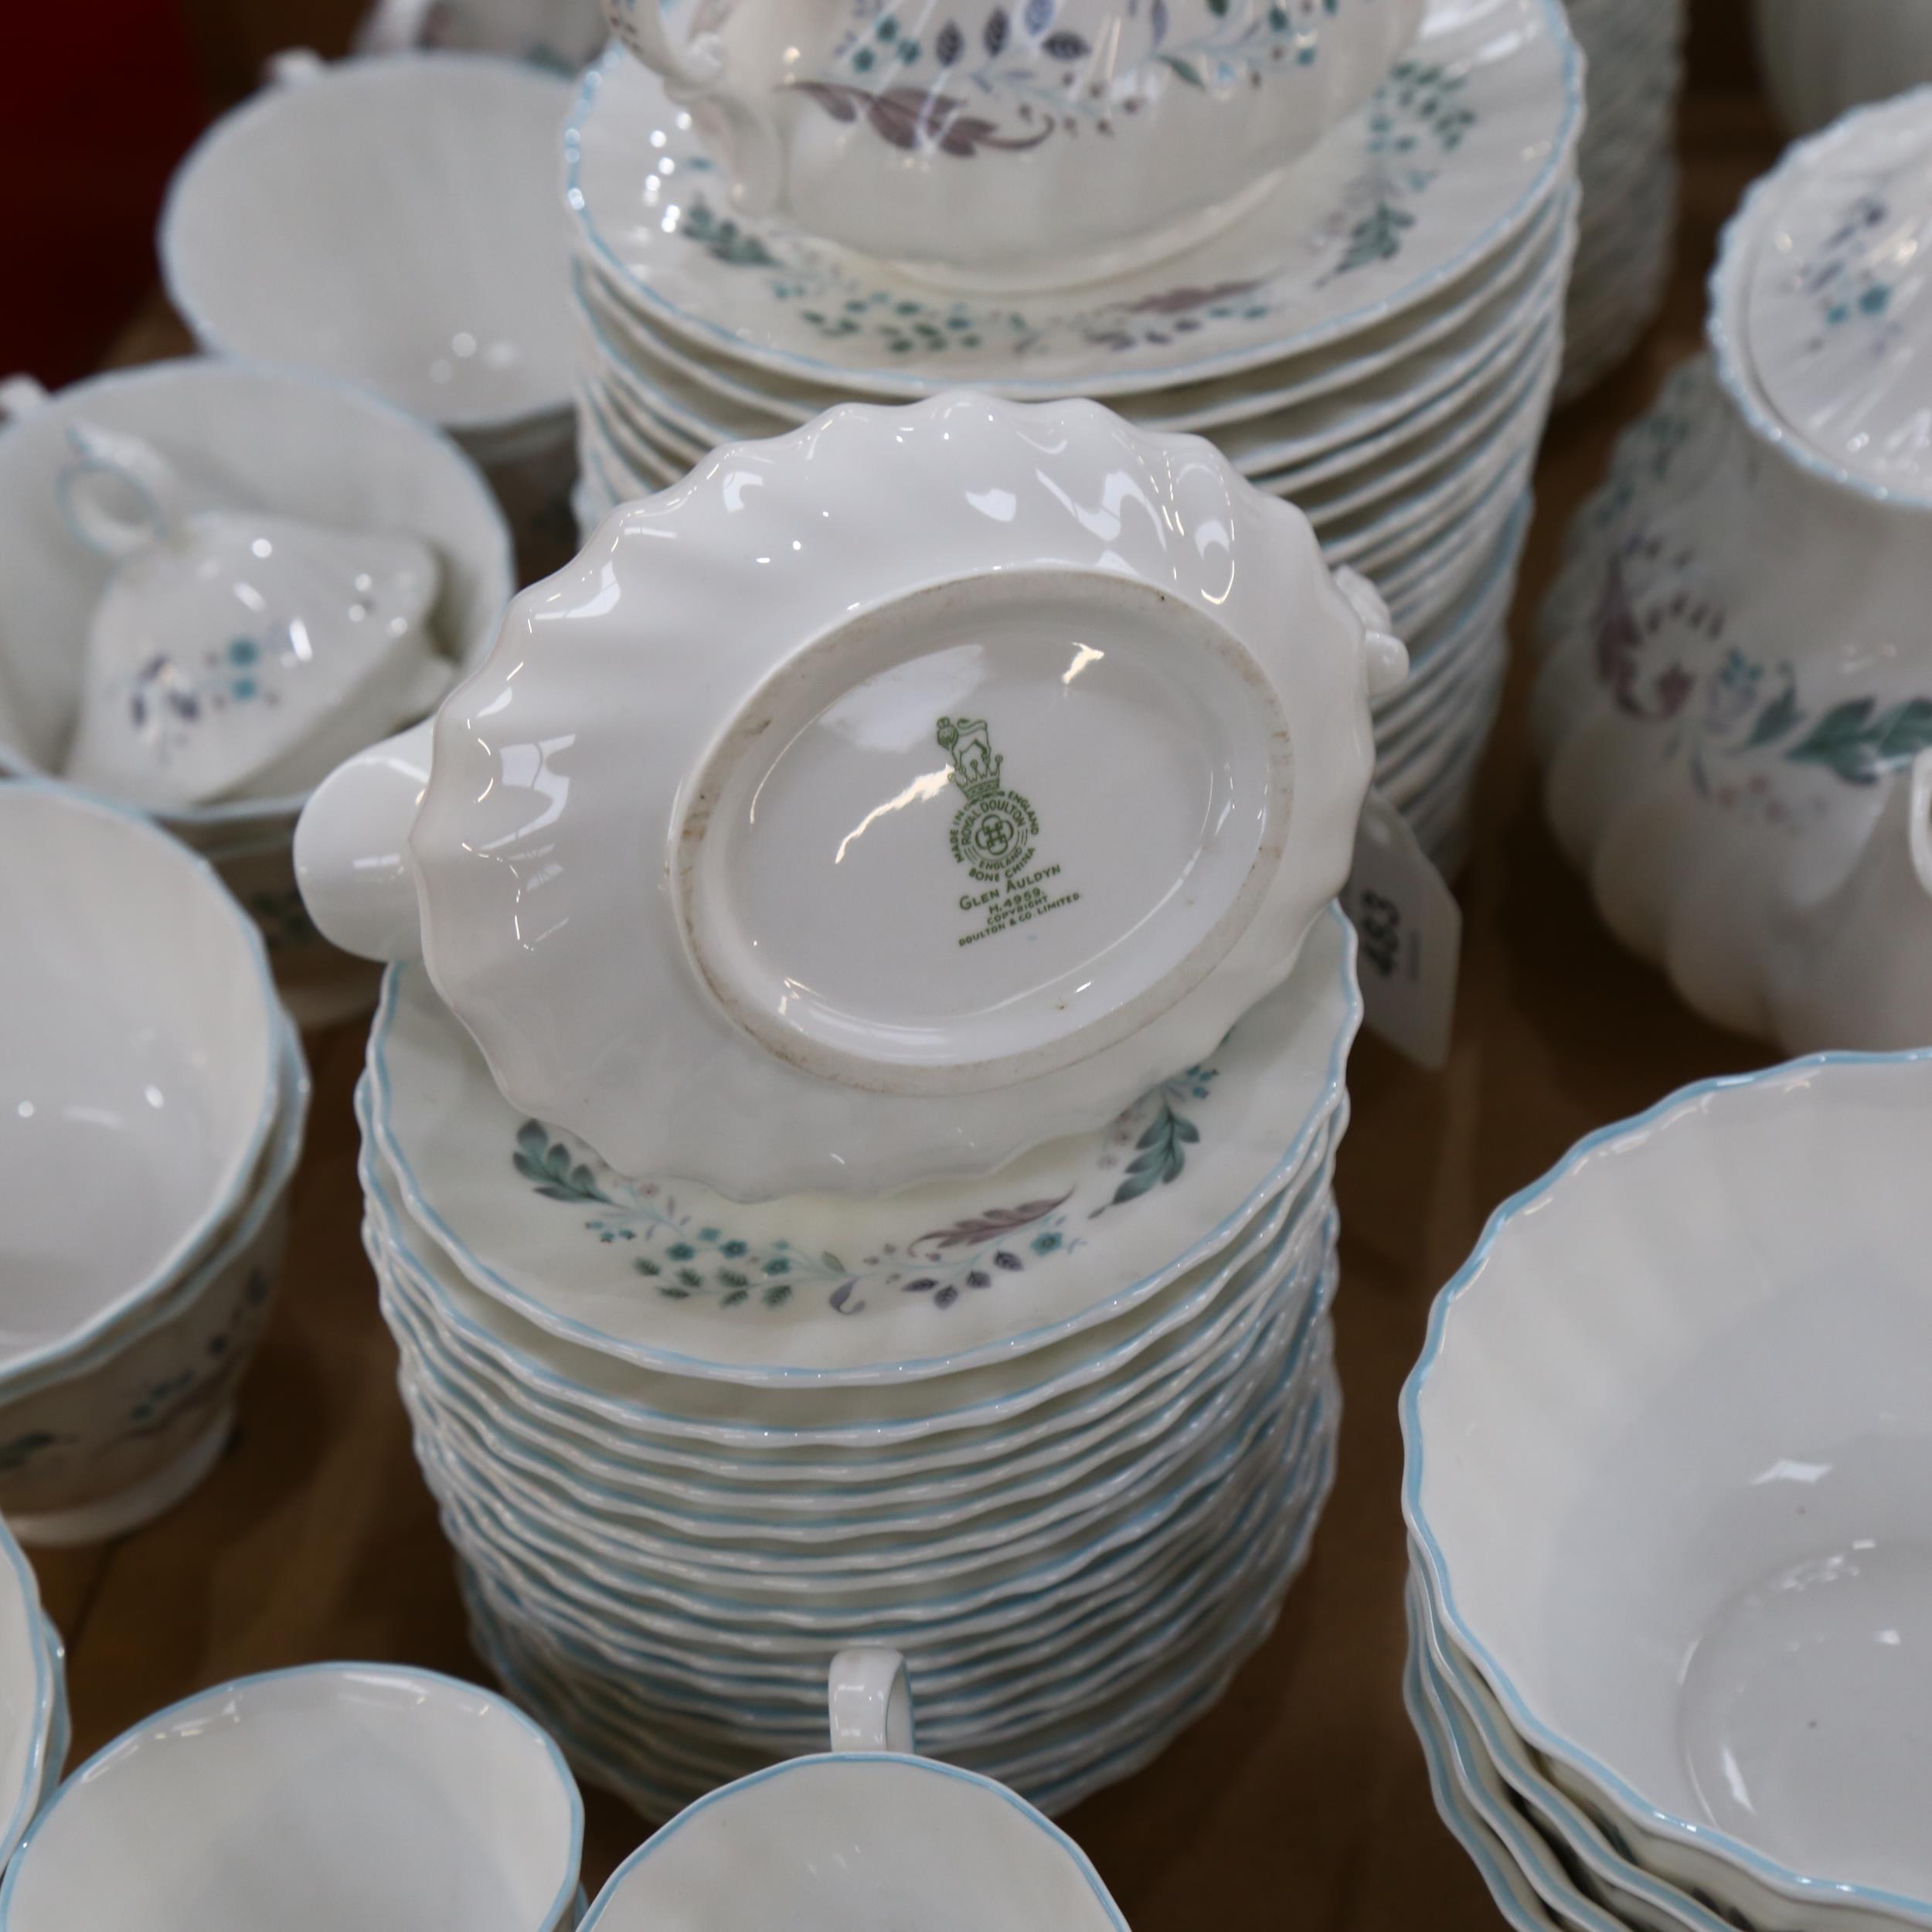 Royal Doulton Glen Auldyn pattern tea service and coffee service, including 4 jugs, 4 sugar bowls, - Image 2 of 2